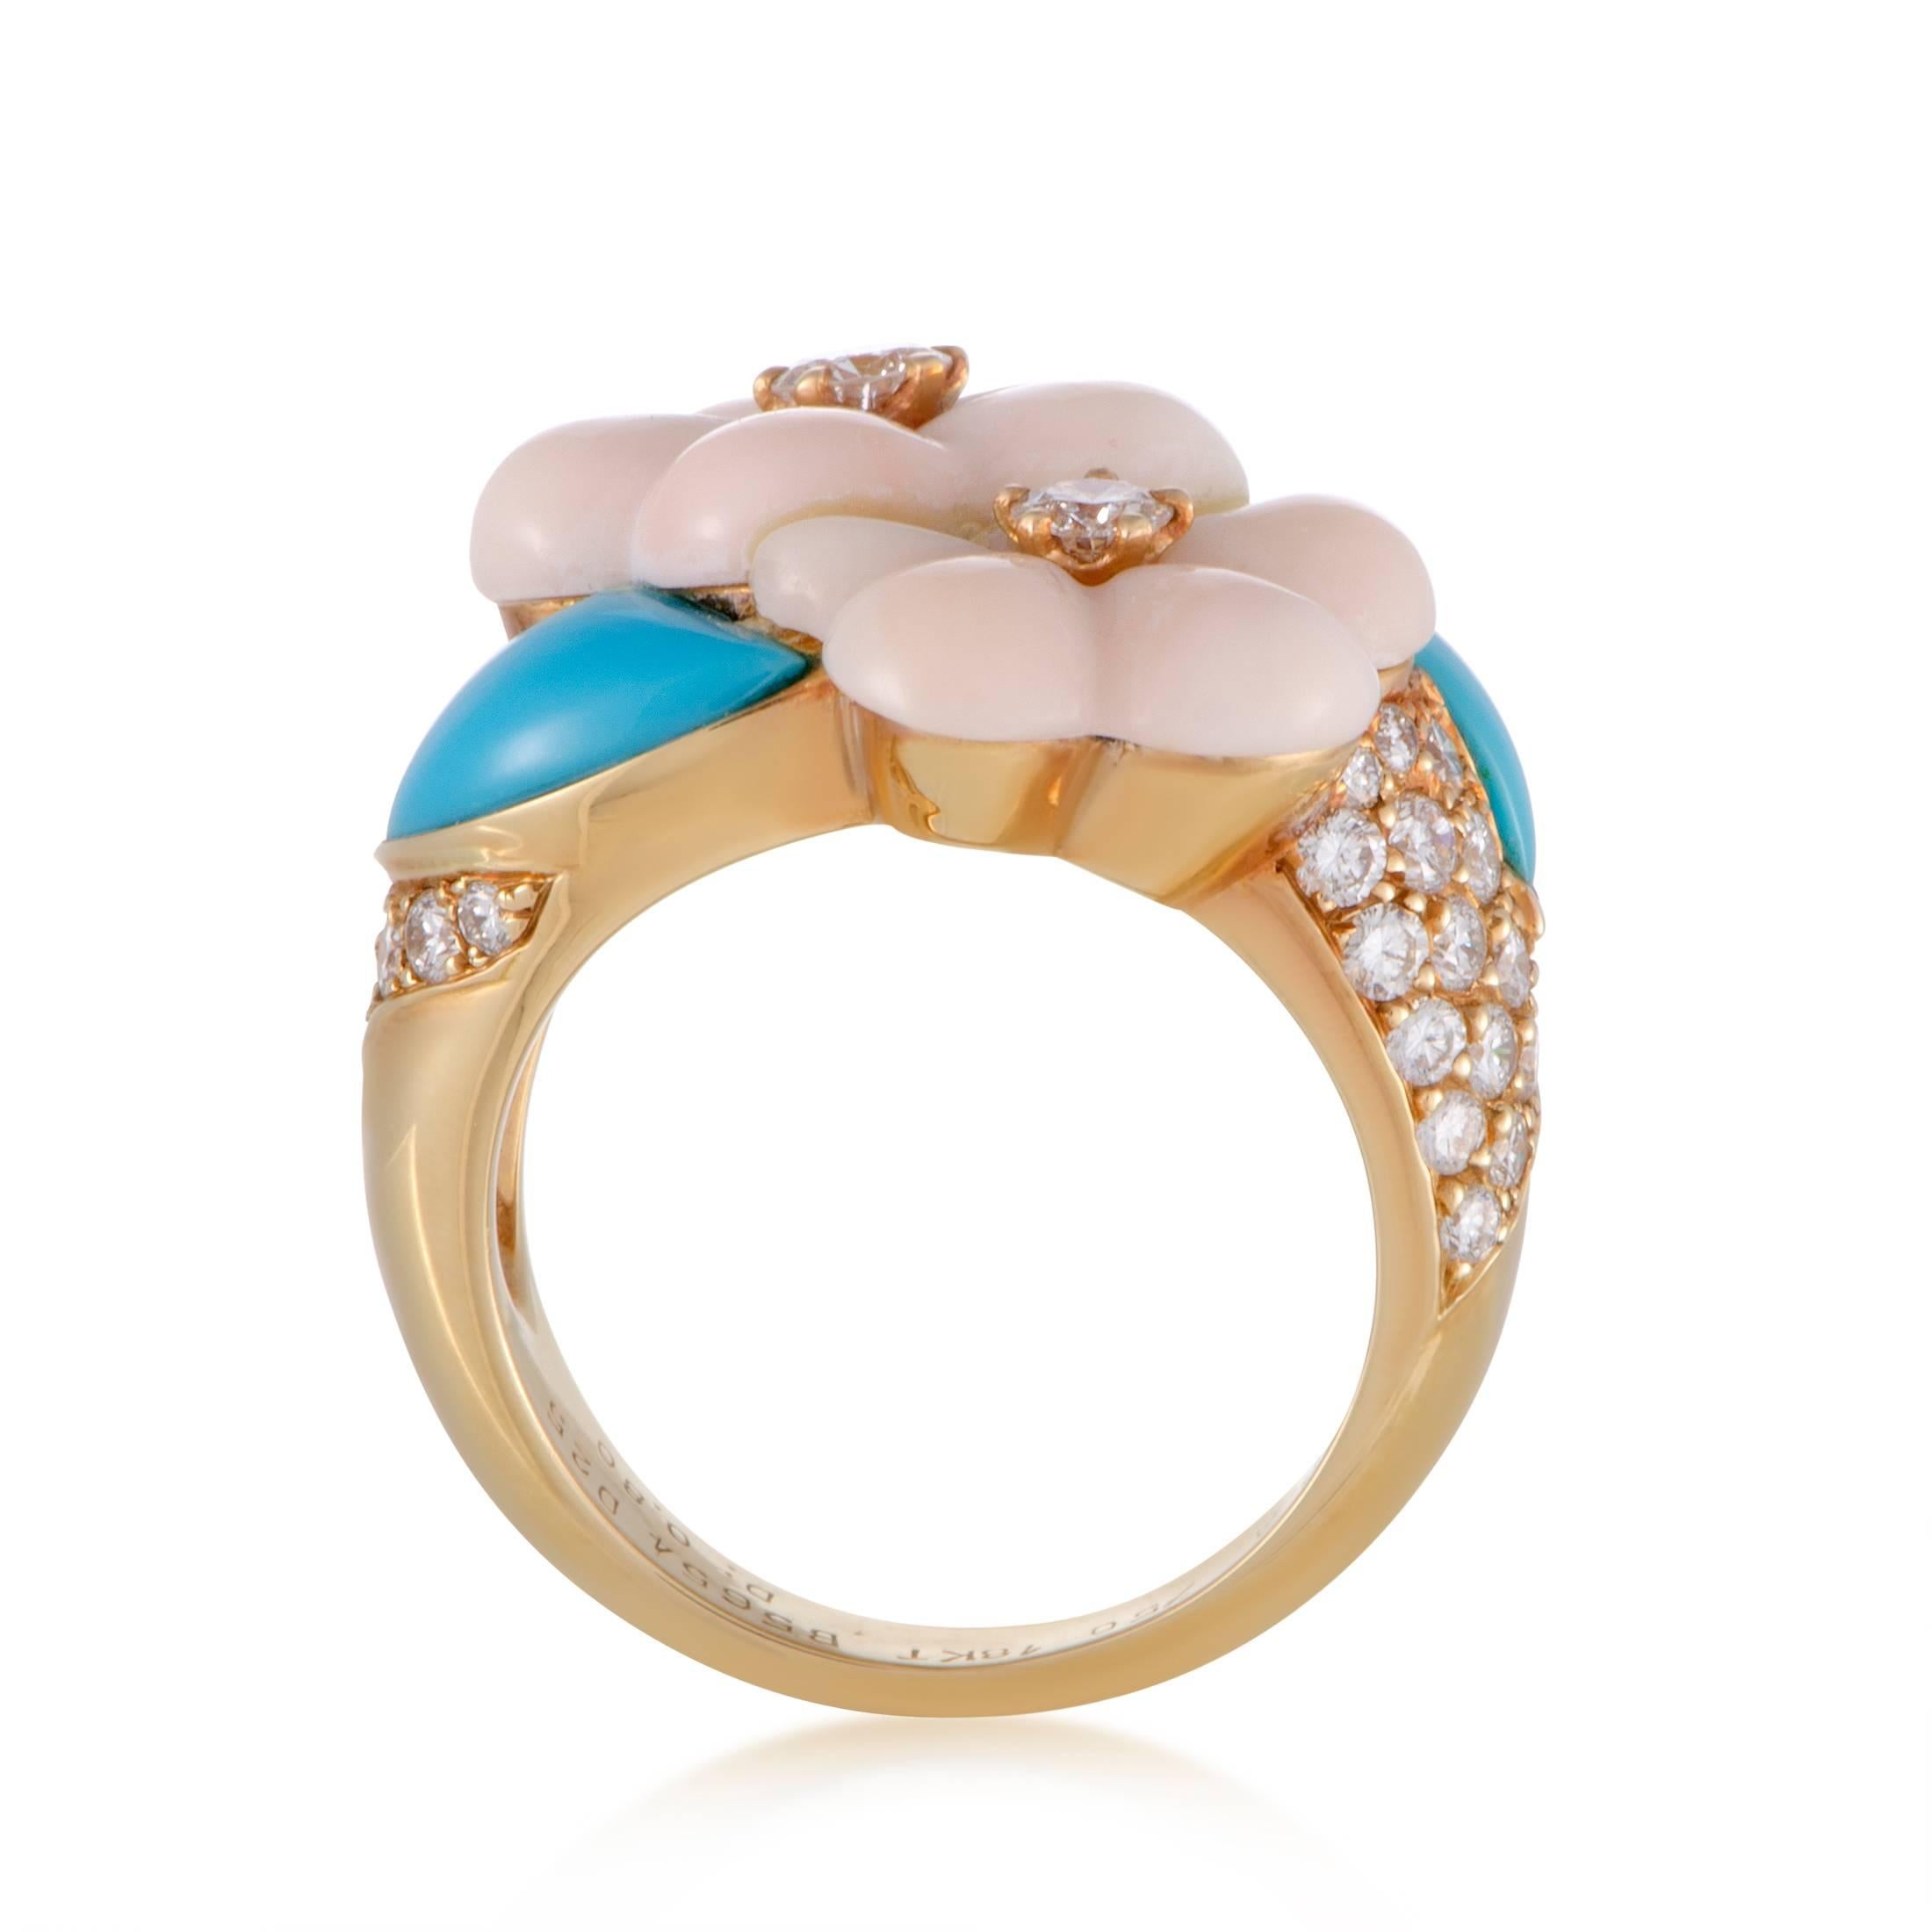 Designed in the brand’s distinctive manner of employing gentle colors to brilliantly depict nature, this flower-inspired ring from Van Cleef & Arpels is made of radiant 18K yellow gold with lovely turquoise and coral stones as well as sparkling